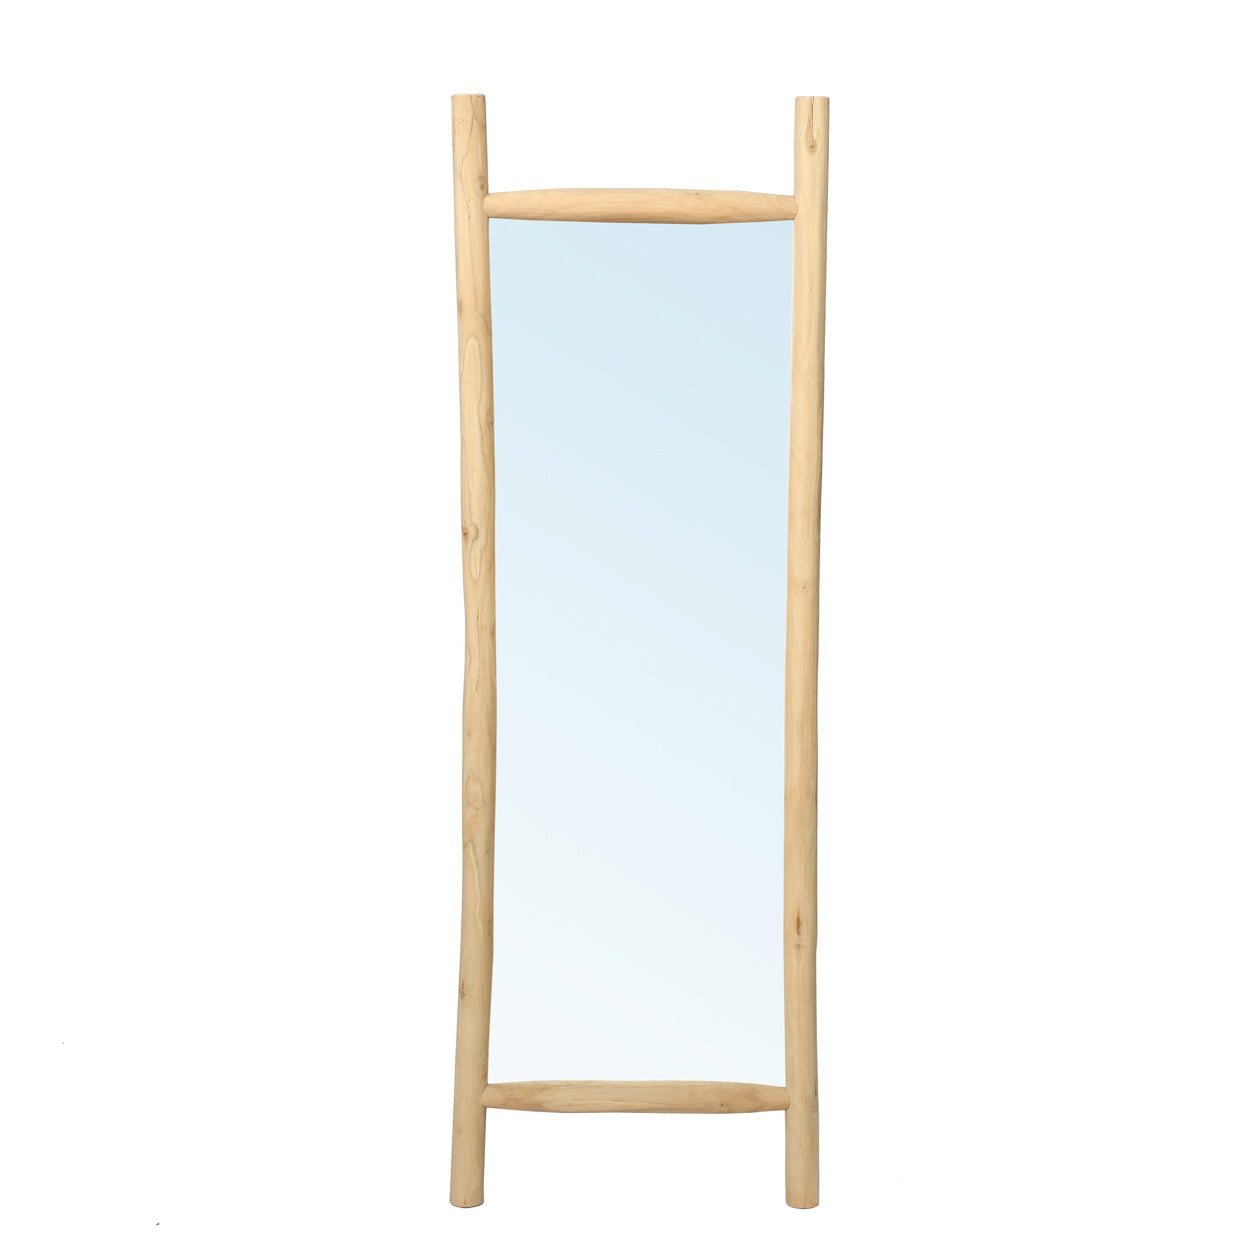 The Island Dressing Mirror - Natural